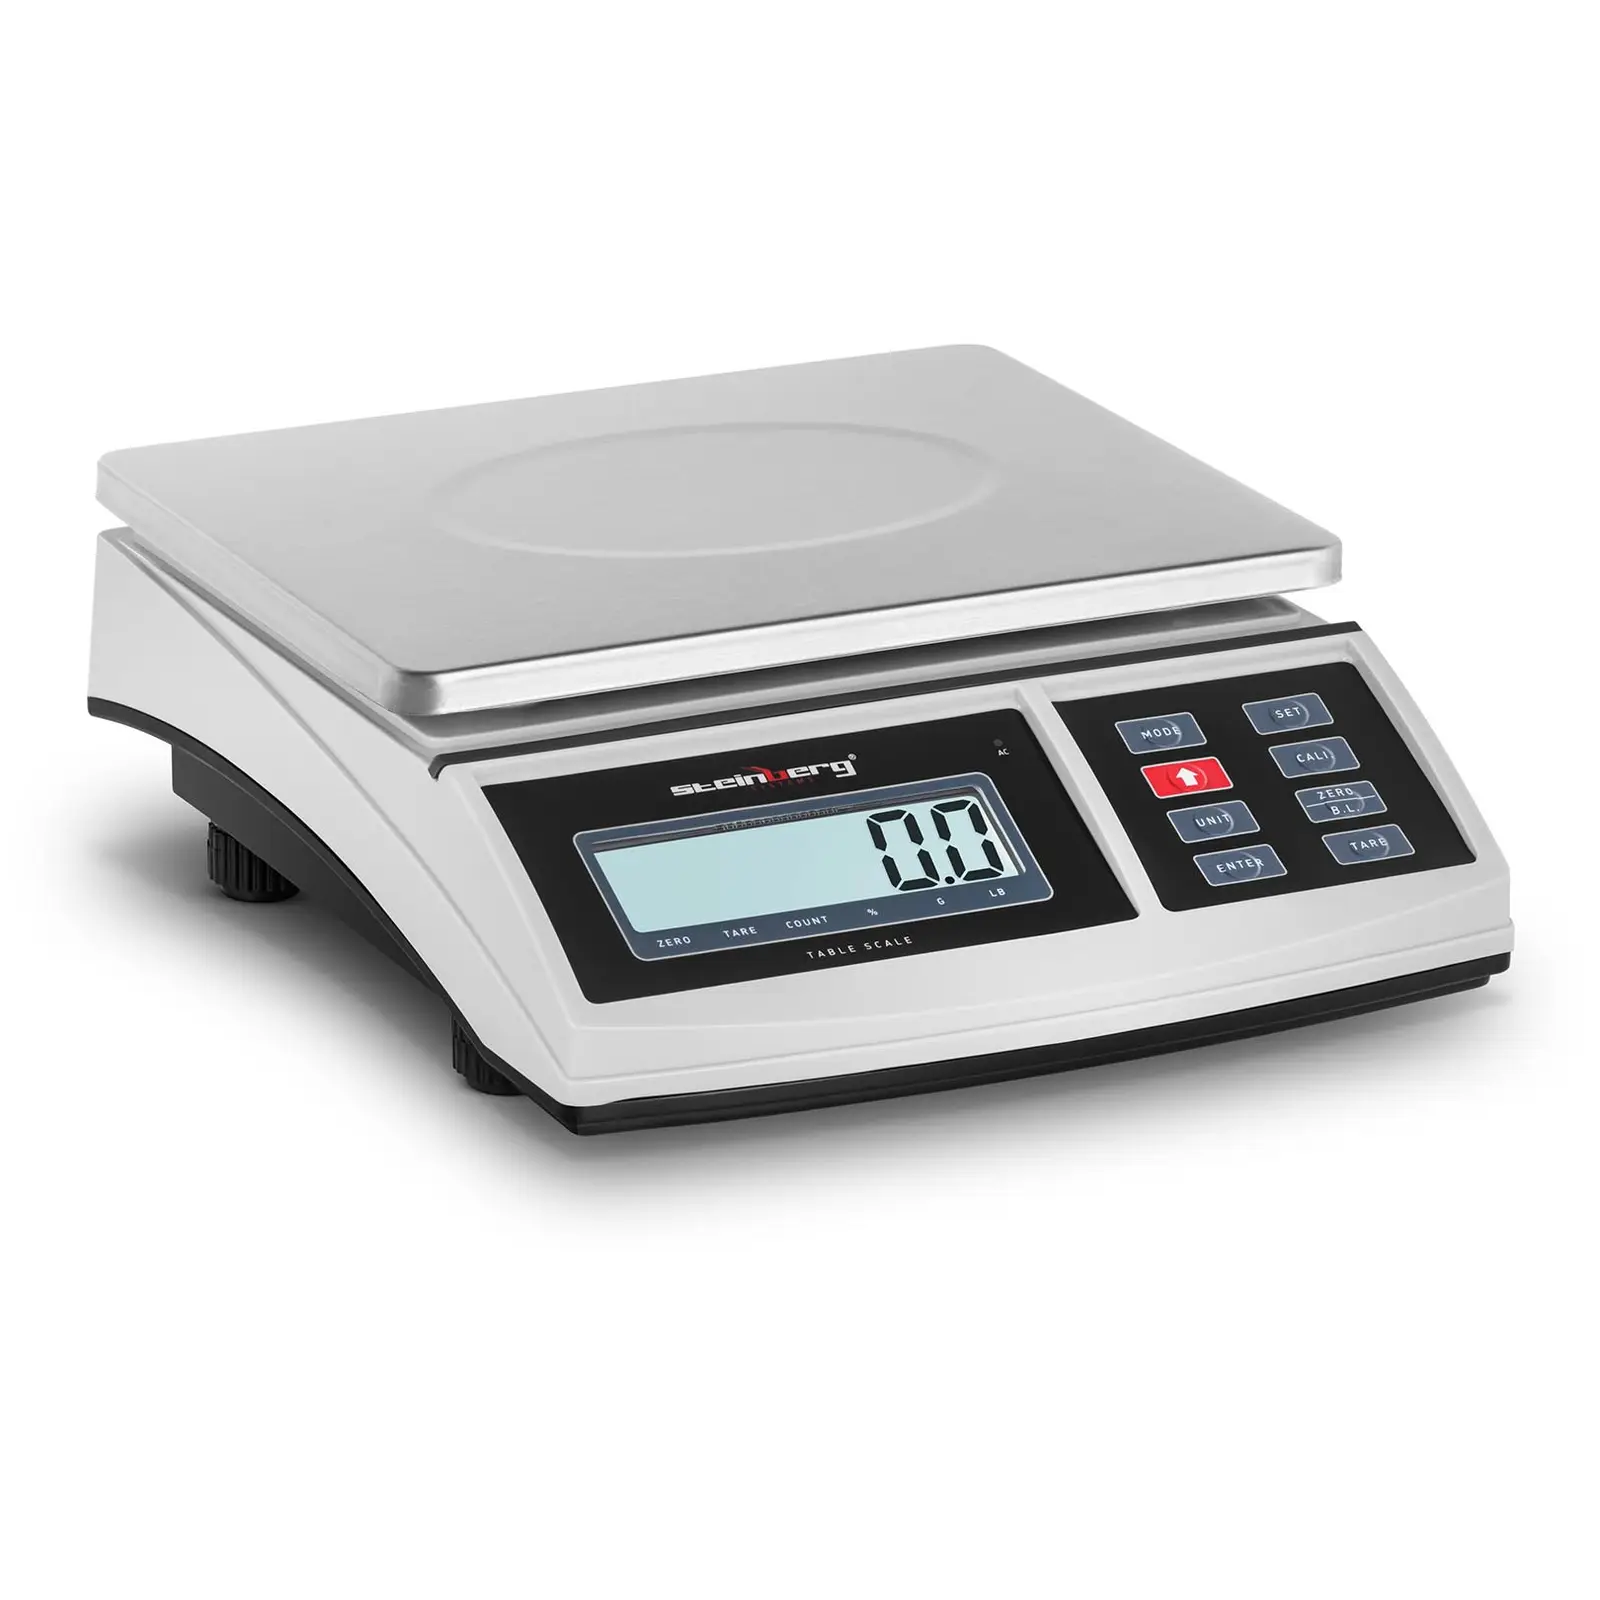 Table Scale - 15 kg / 0.5 g - 21 x 27 cm - LCD